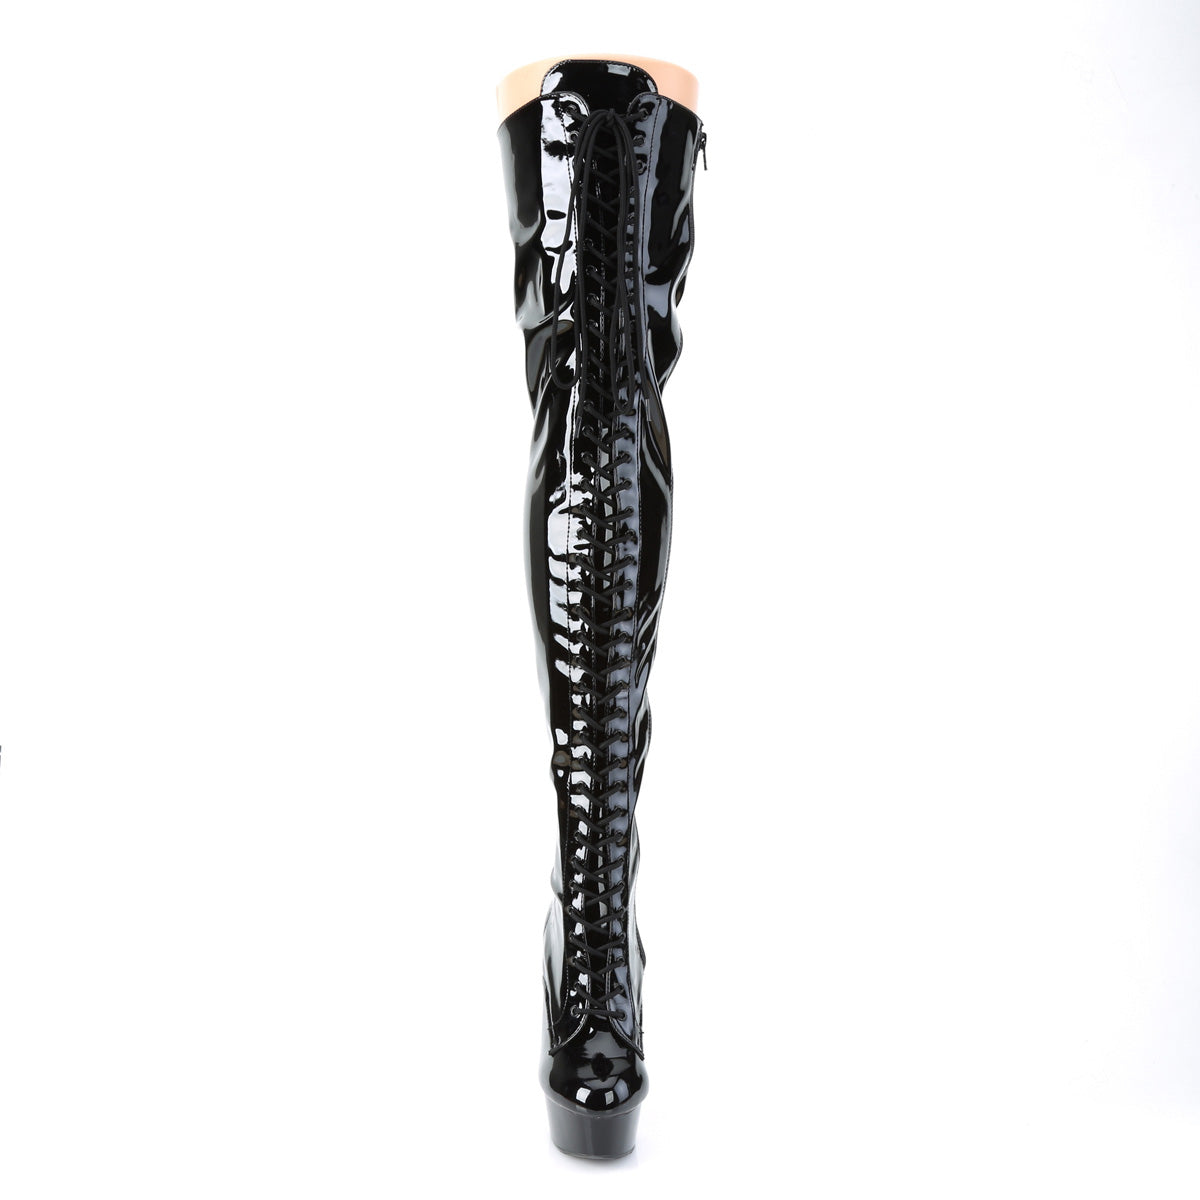 DELIGHT-3023 6" Heel Black Stretch Patent Pole Dancer Boots-Pleaser- Sexy Shoes Alternative Footwear